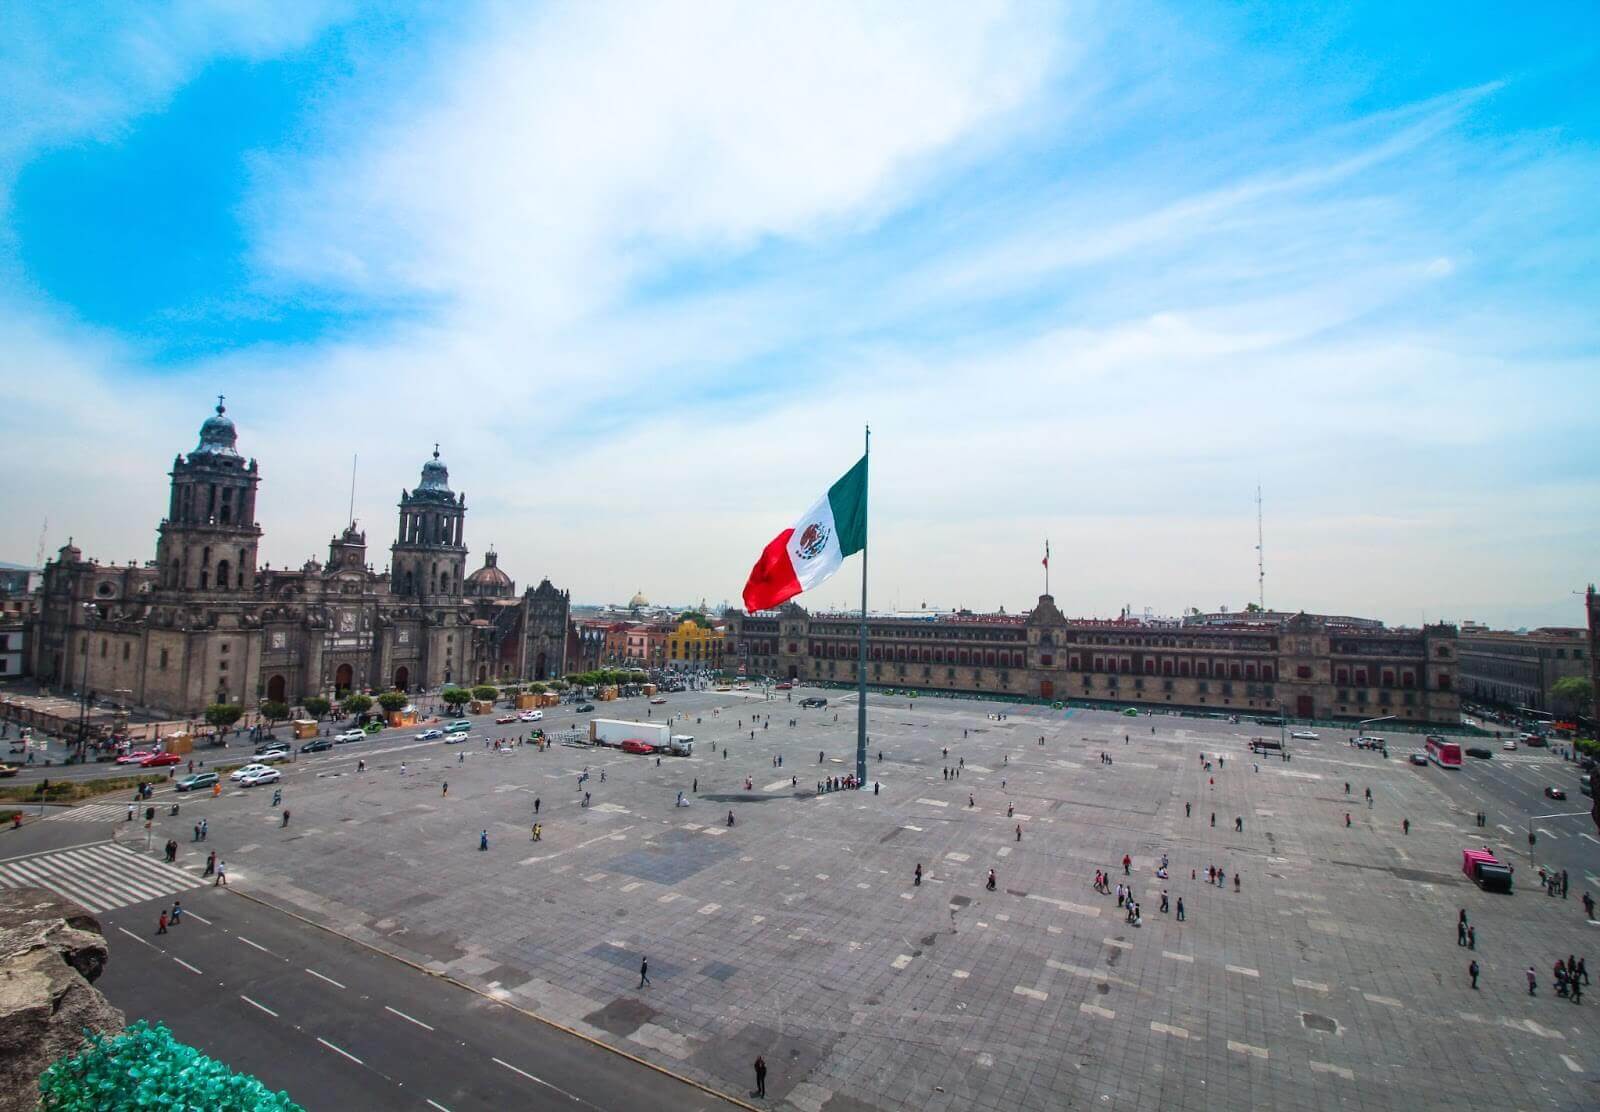 Why invest in Mexico?